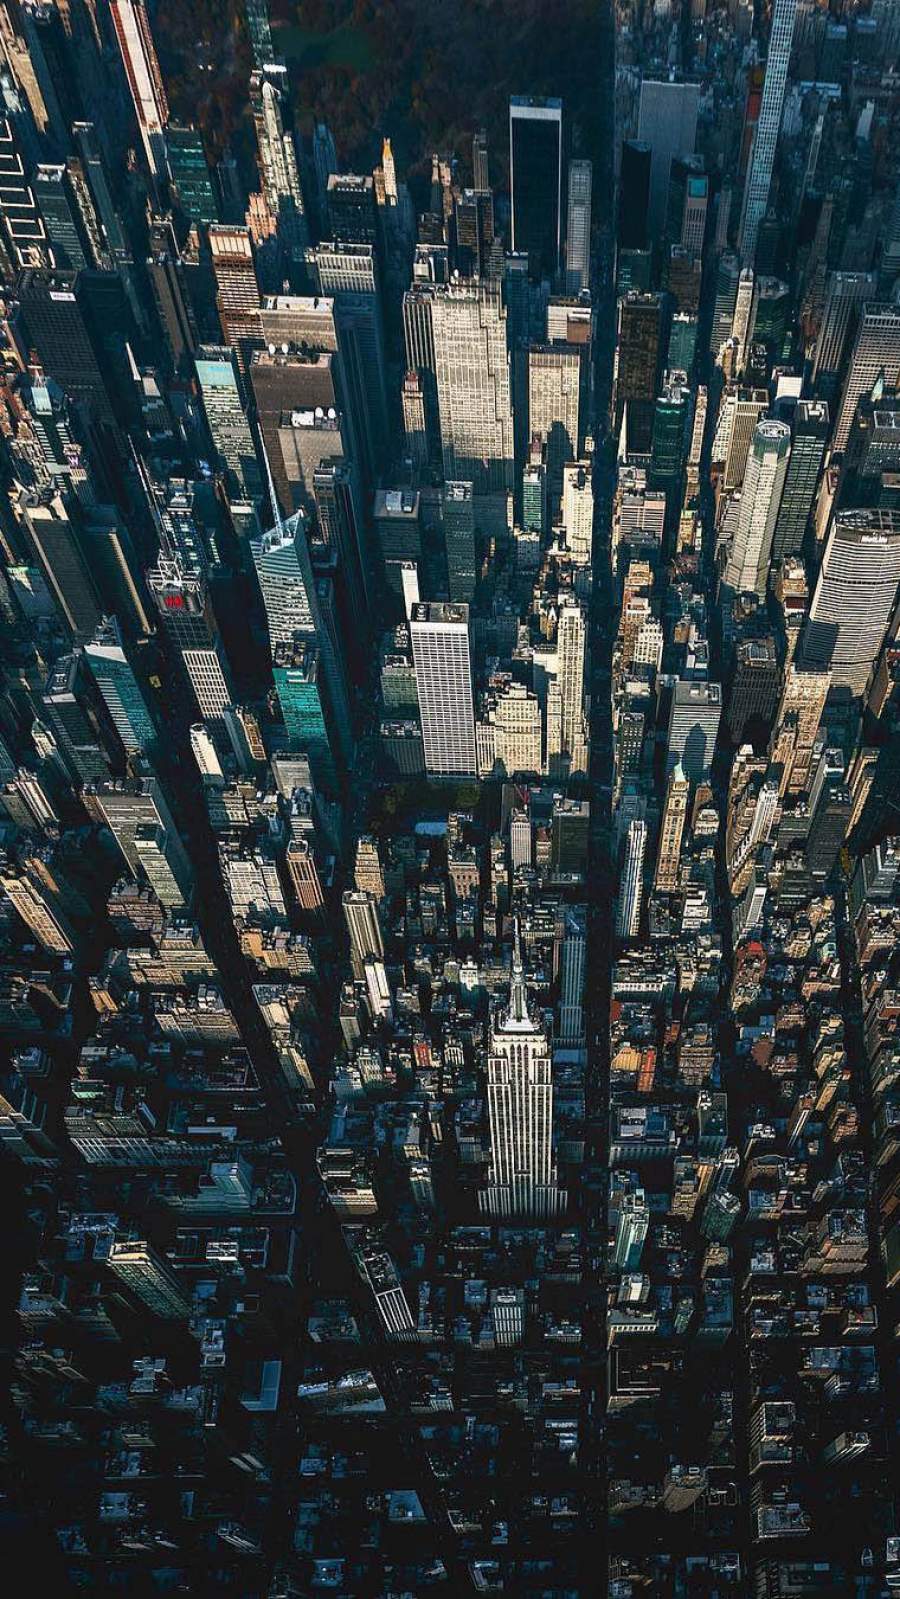 New York Aerial View Iphone Wallpaper Iphone Wallpapers Iphone Wallpapers